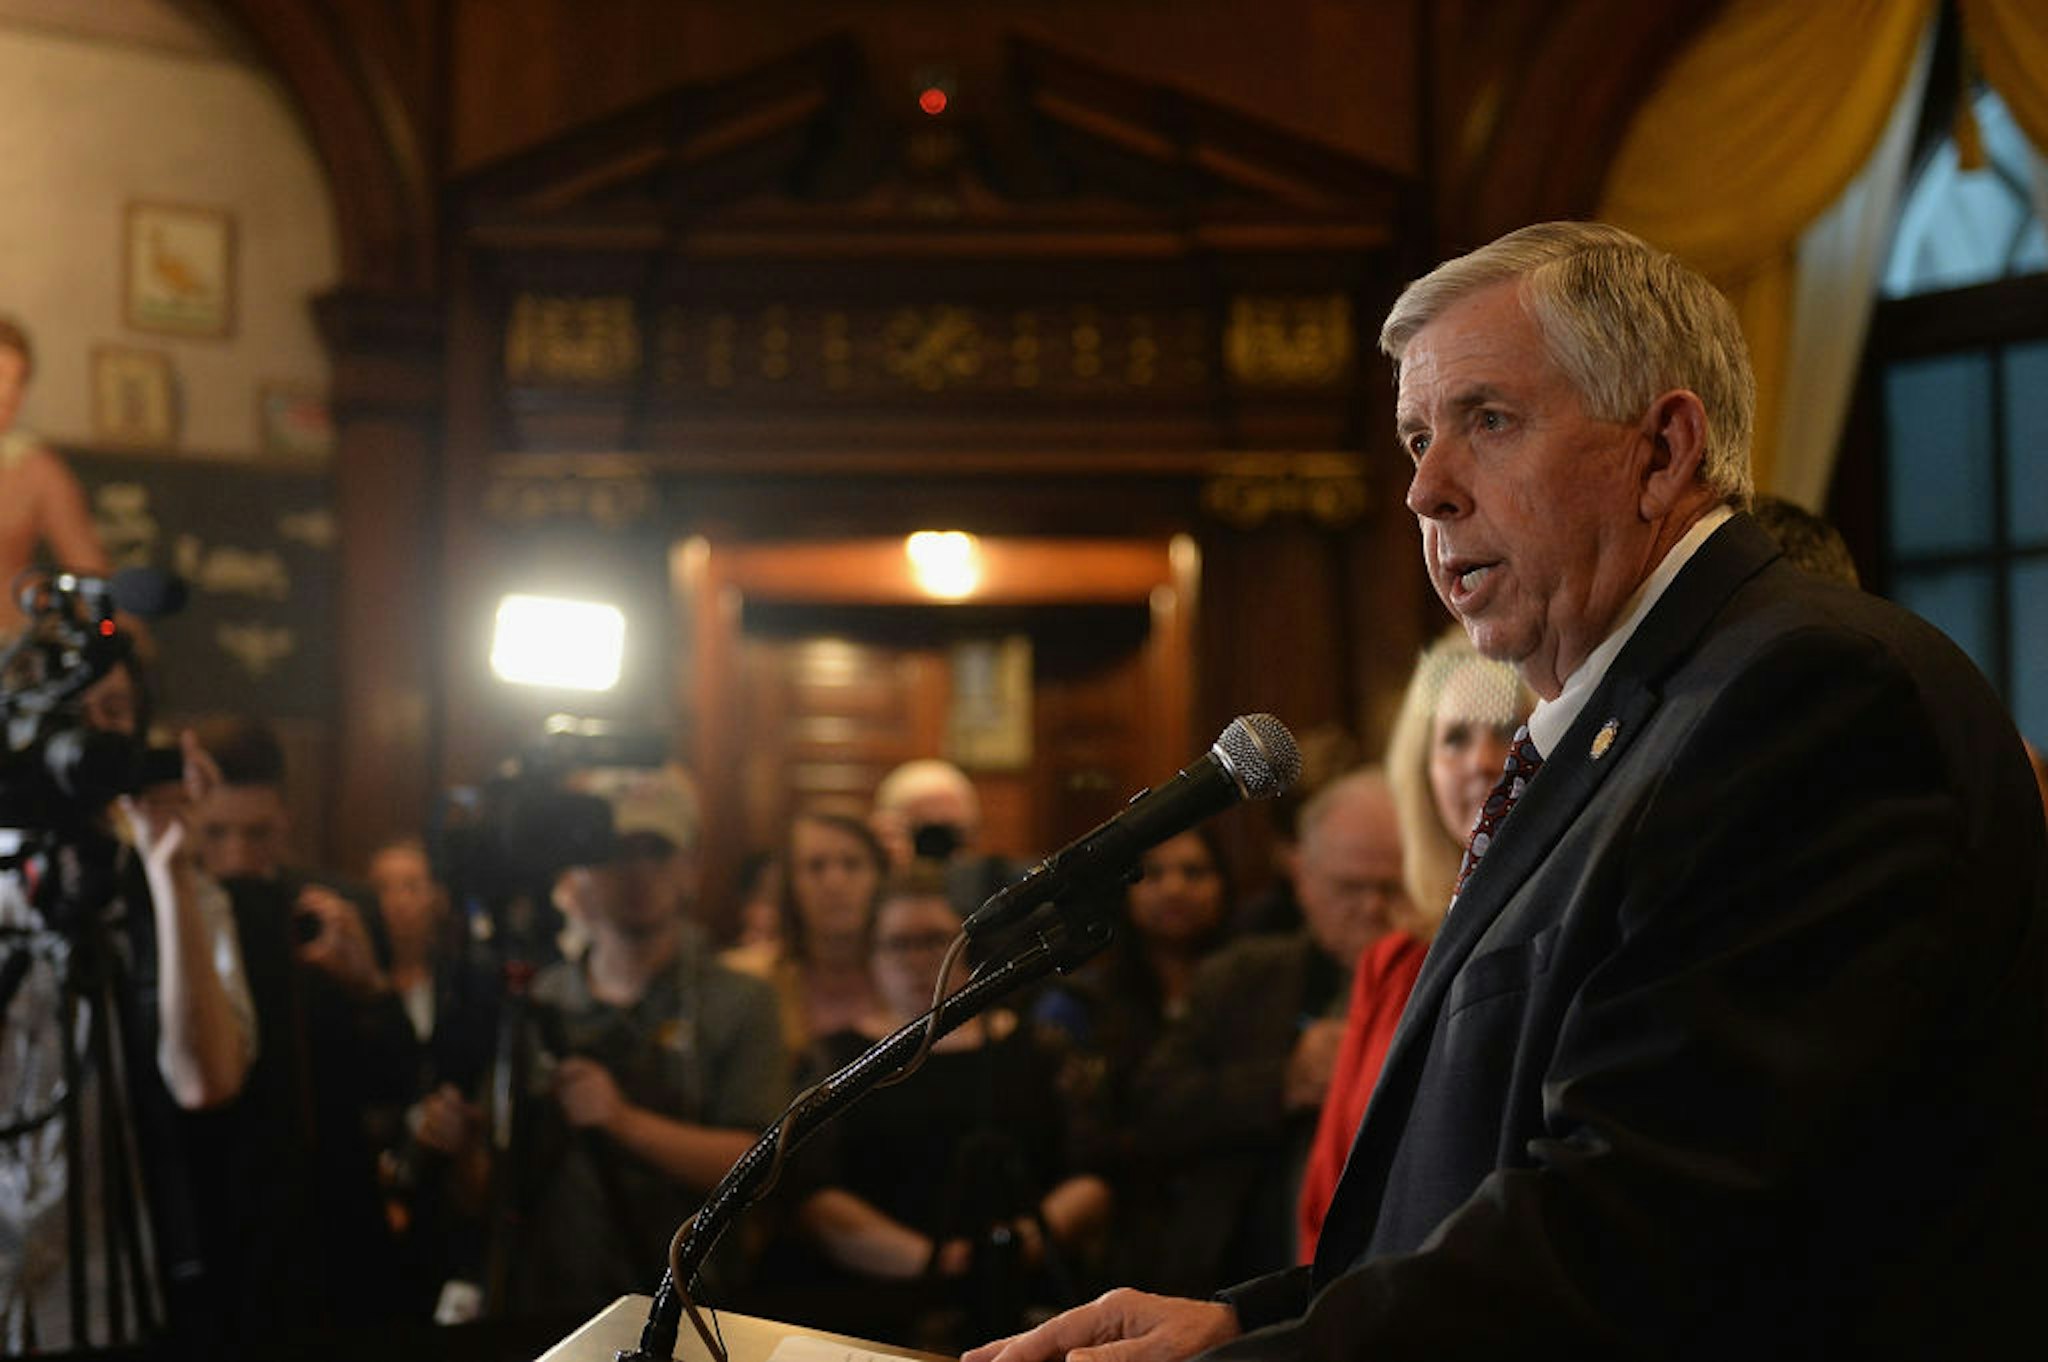 Missouri Governor Mike Parson addresses the media on the last day of legislative session at the Missouri State Capitol Building on May 17, 2019 in Jefferson City, Missouri. Tension and protest arose after the Missouri House of Representatives passed a bill to ban abortions after 8 weeks of pregnancy. (Photo by Michael B. Thomas/Getty Images)